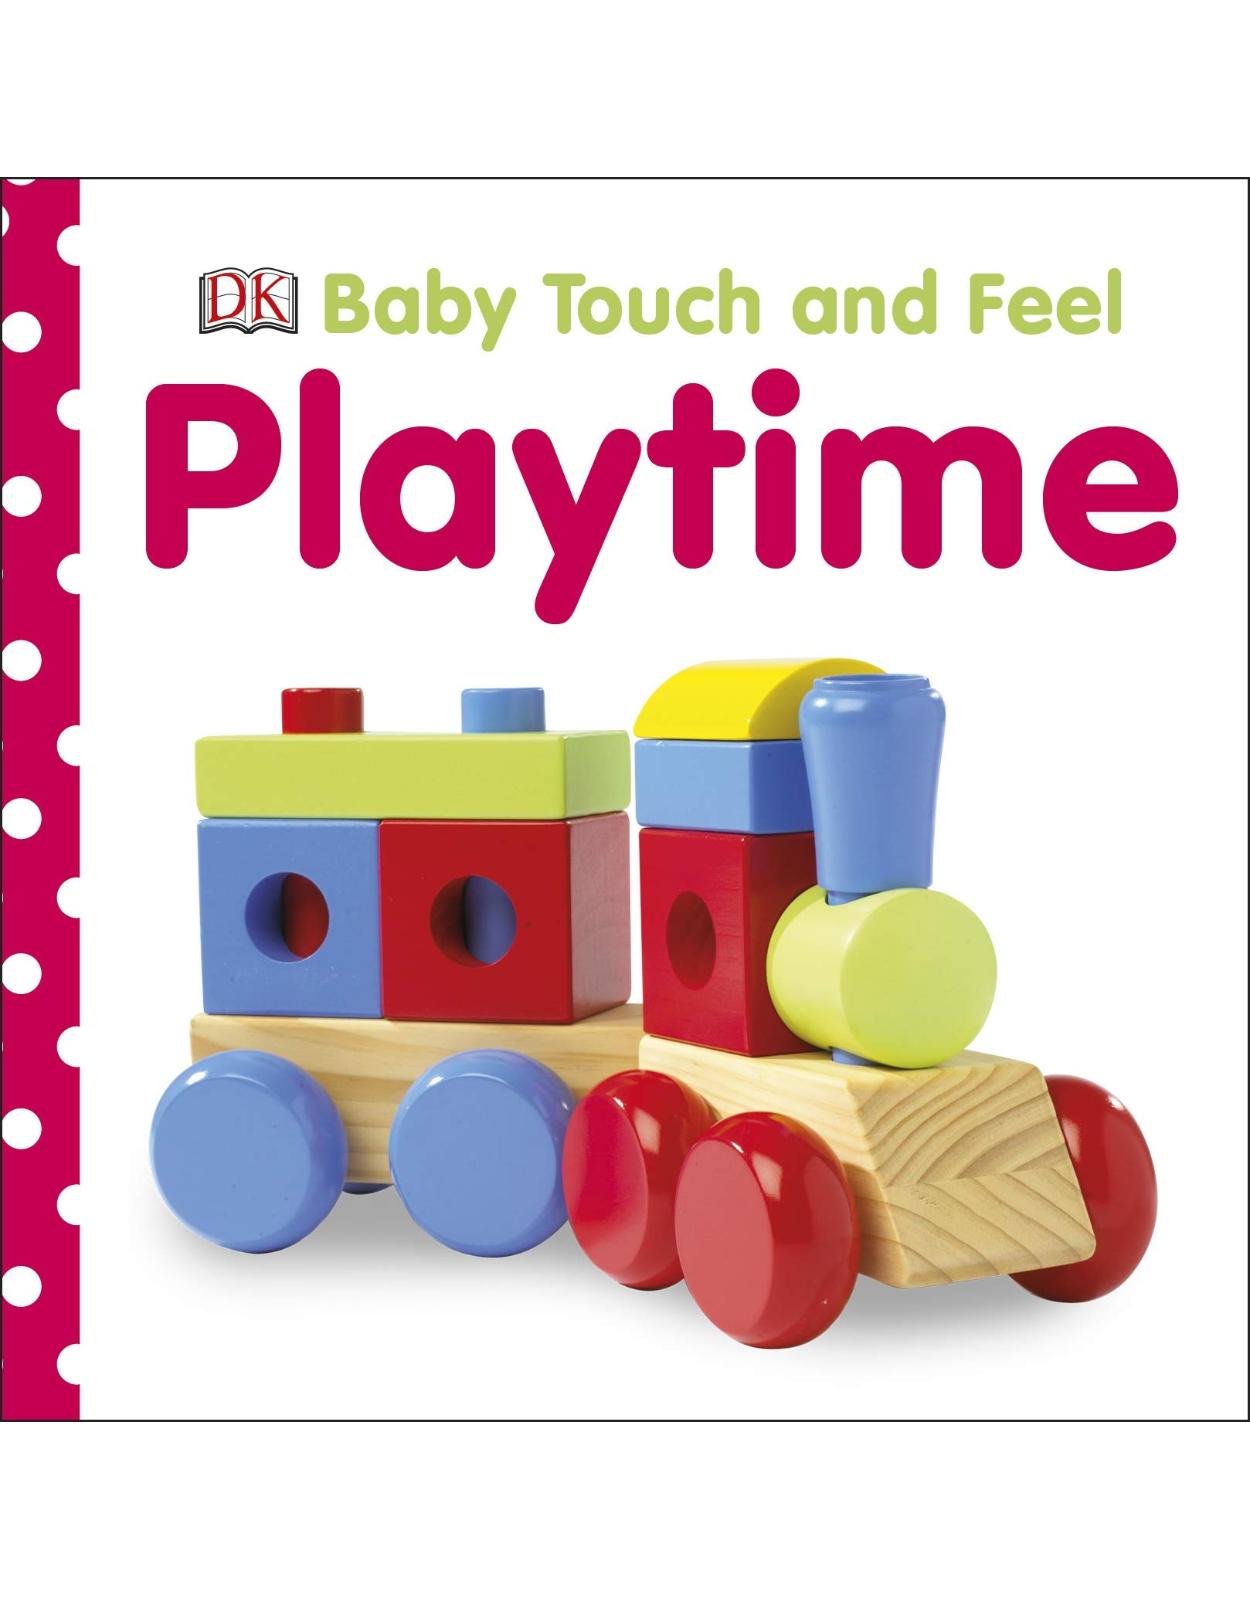 Baby Touch and Feel Playtime